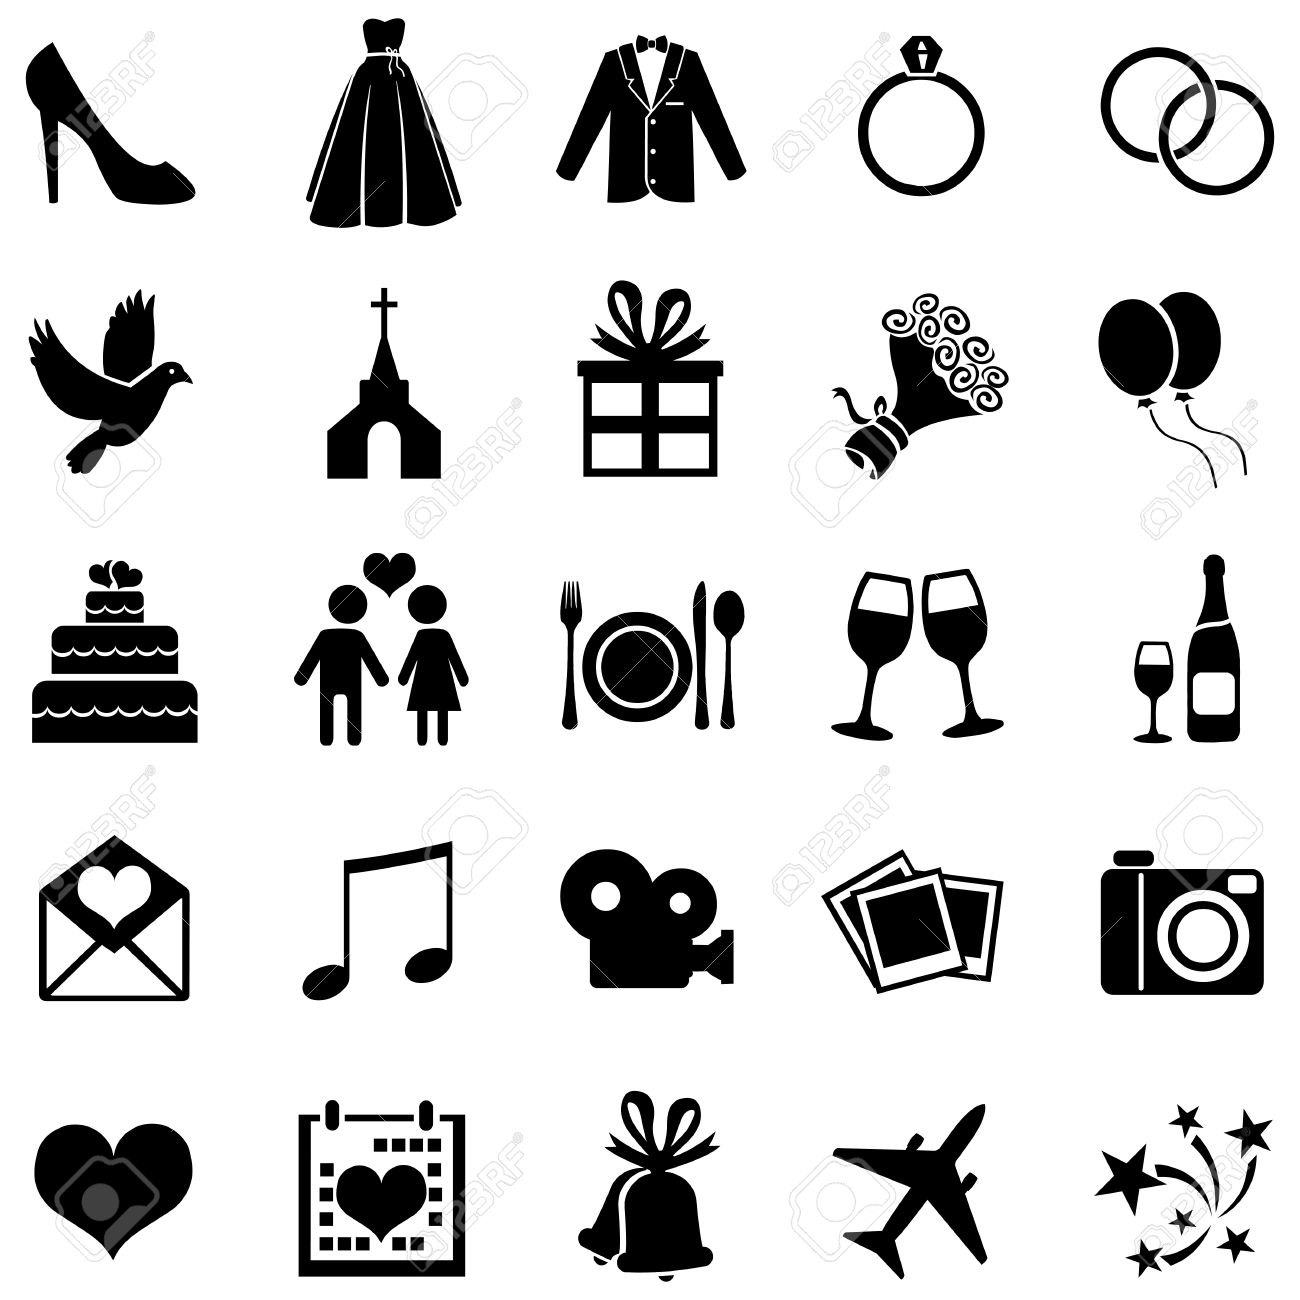 Wedding icons Vector | Free Download